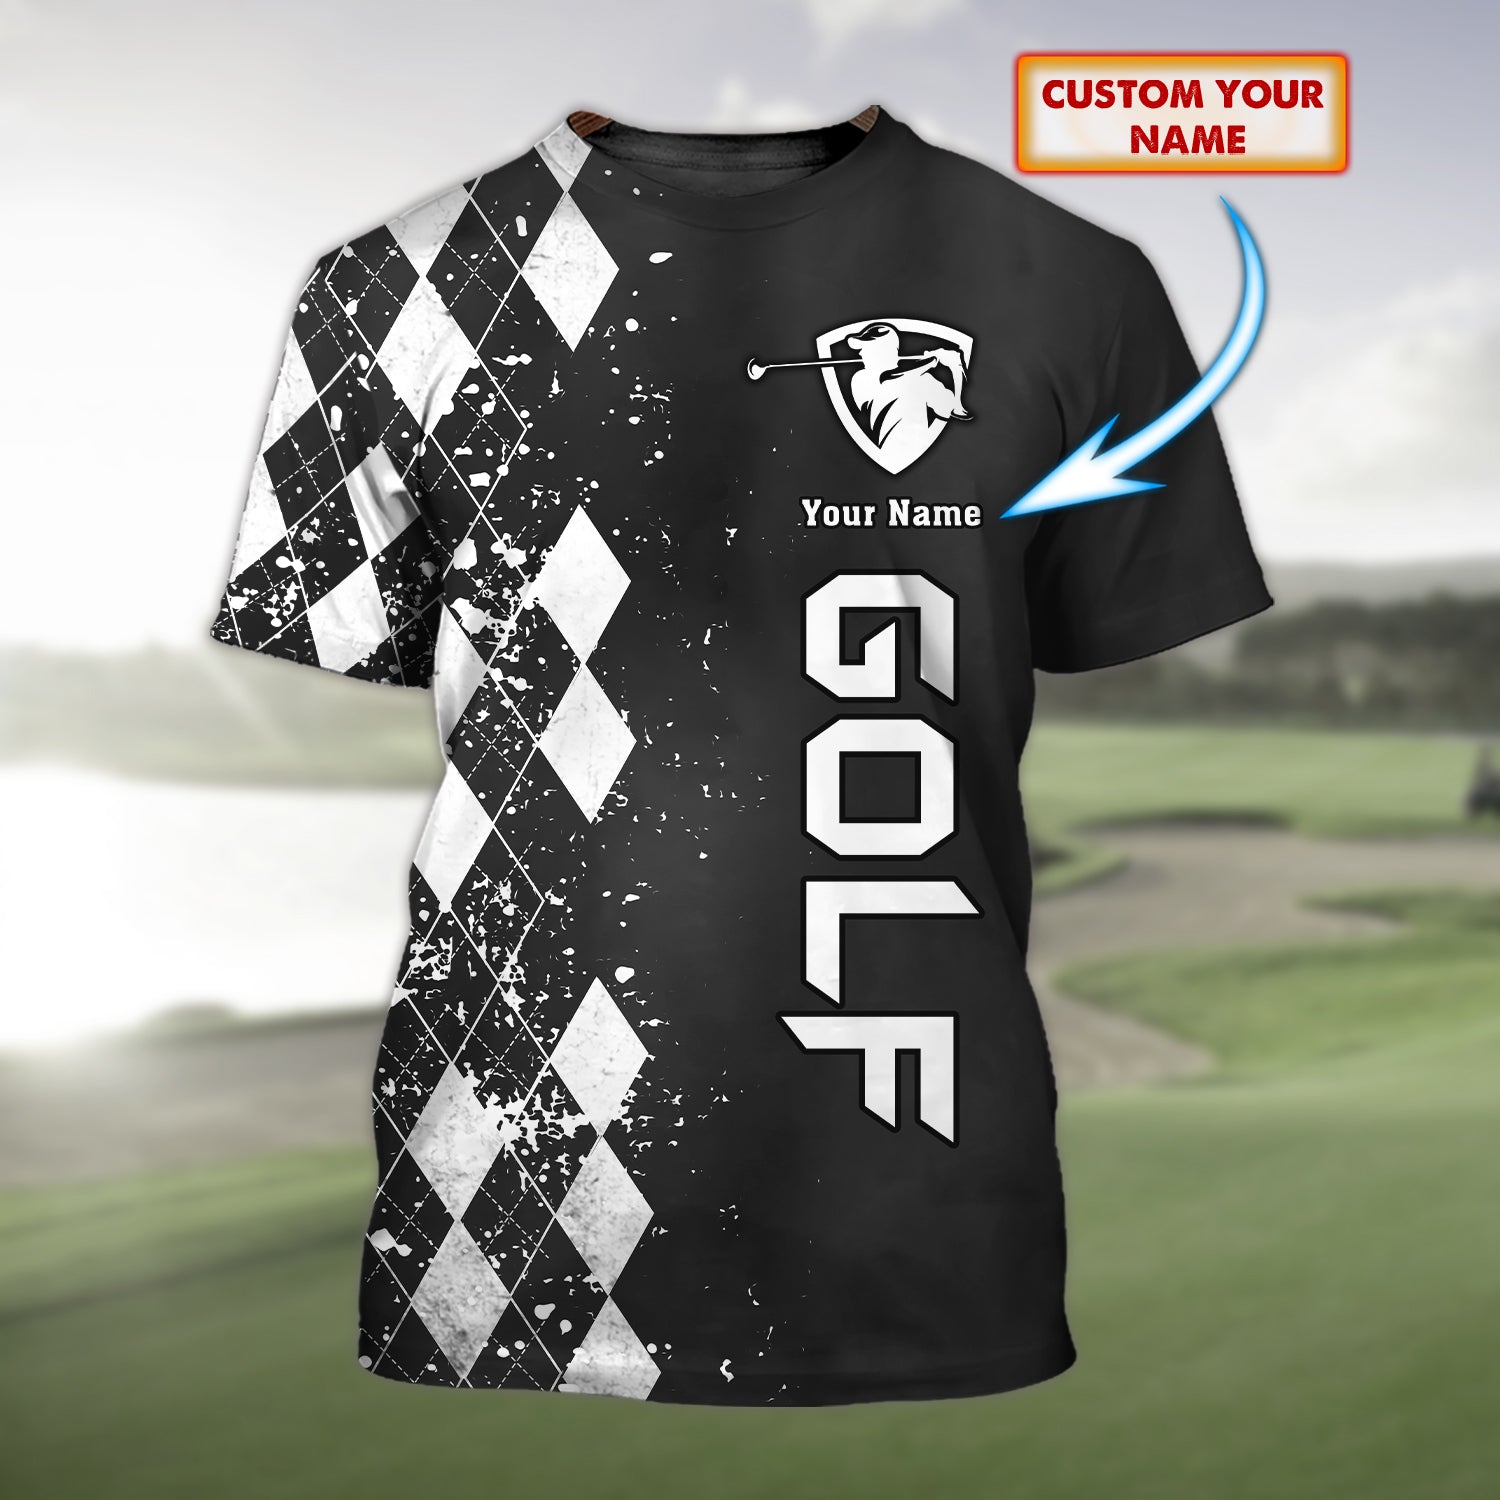 GOLF  - Personalized Name 3D T Shirt 03 - RINC98